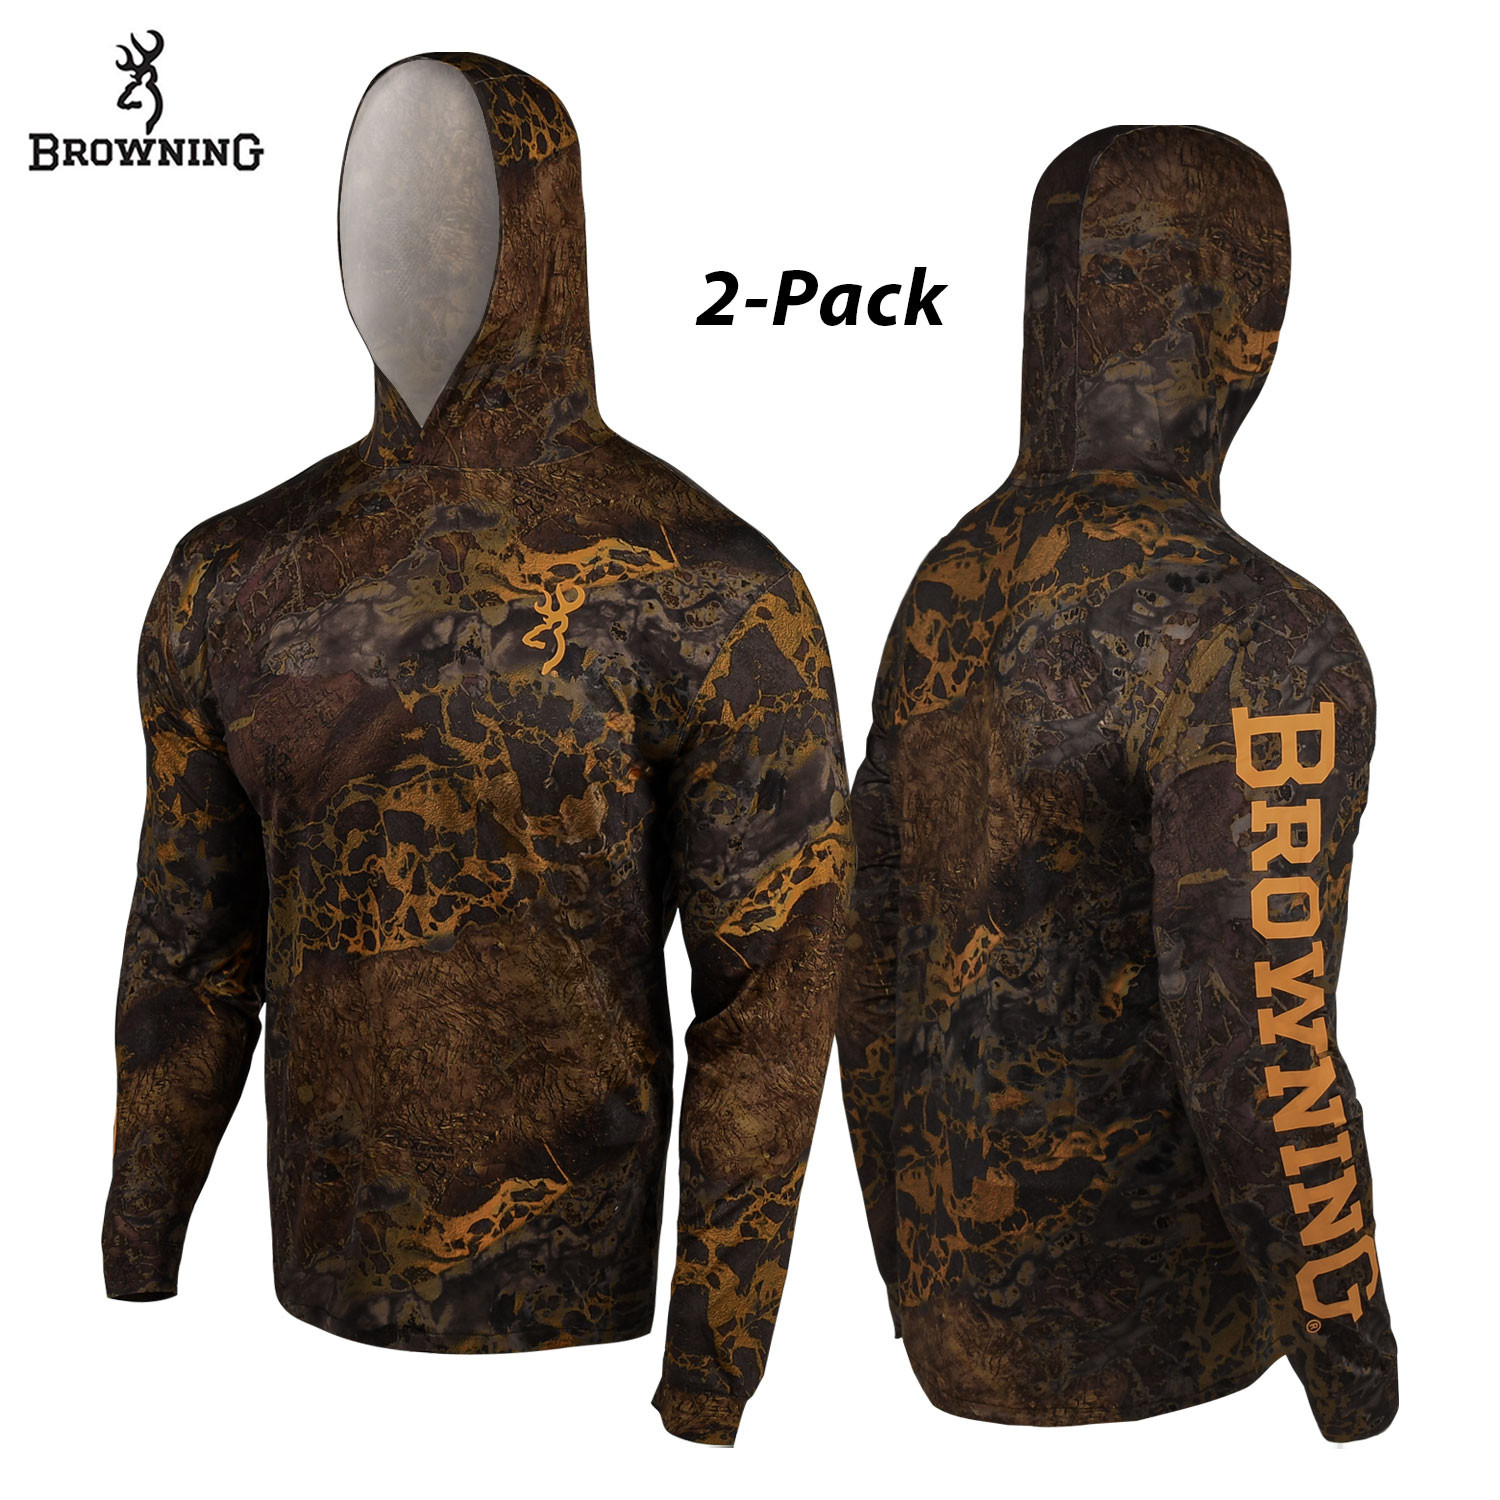 2-Pack: Browning Tech Performance Men's Hooded Crew $17.99 + Free Shipping